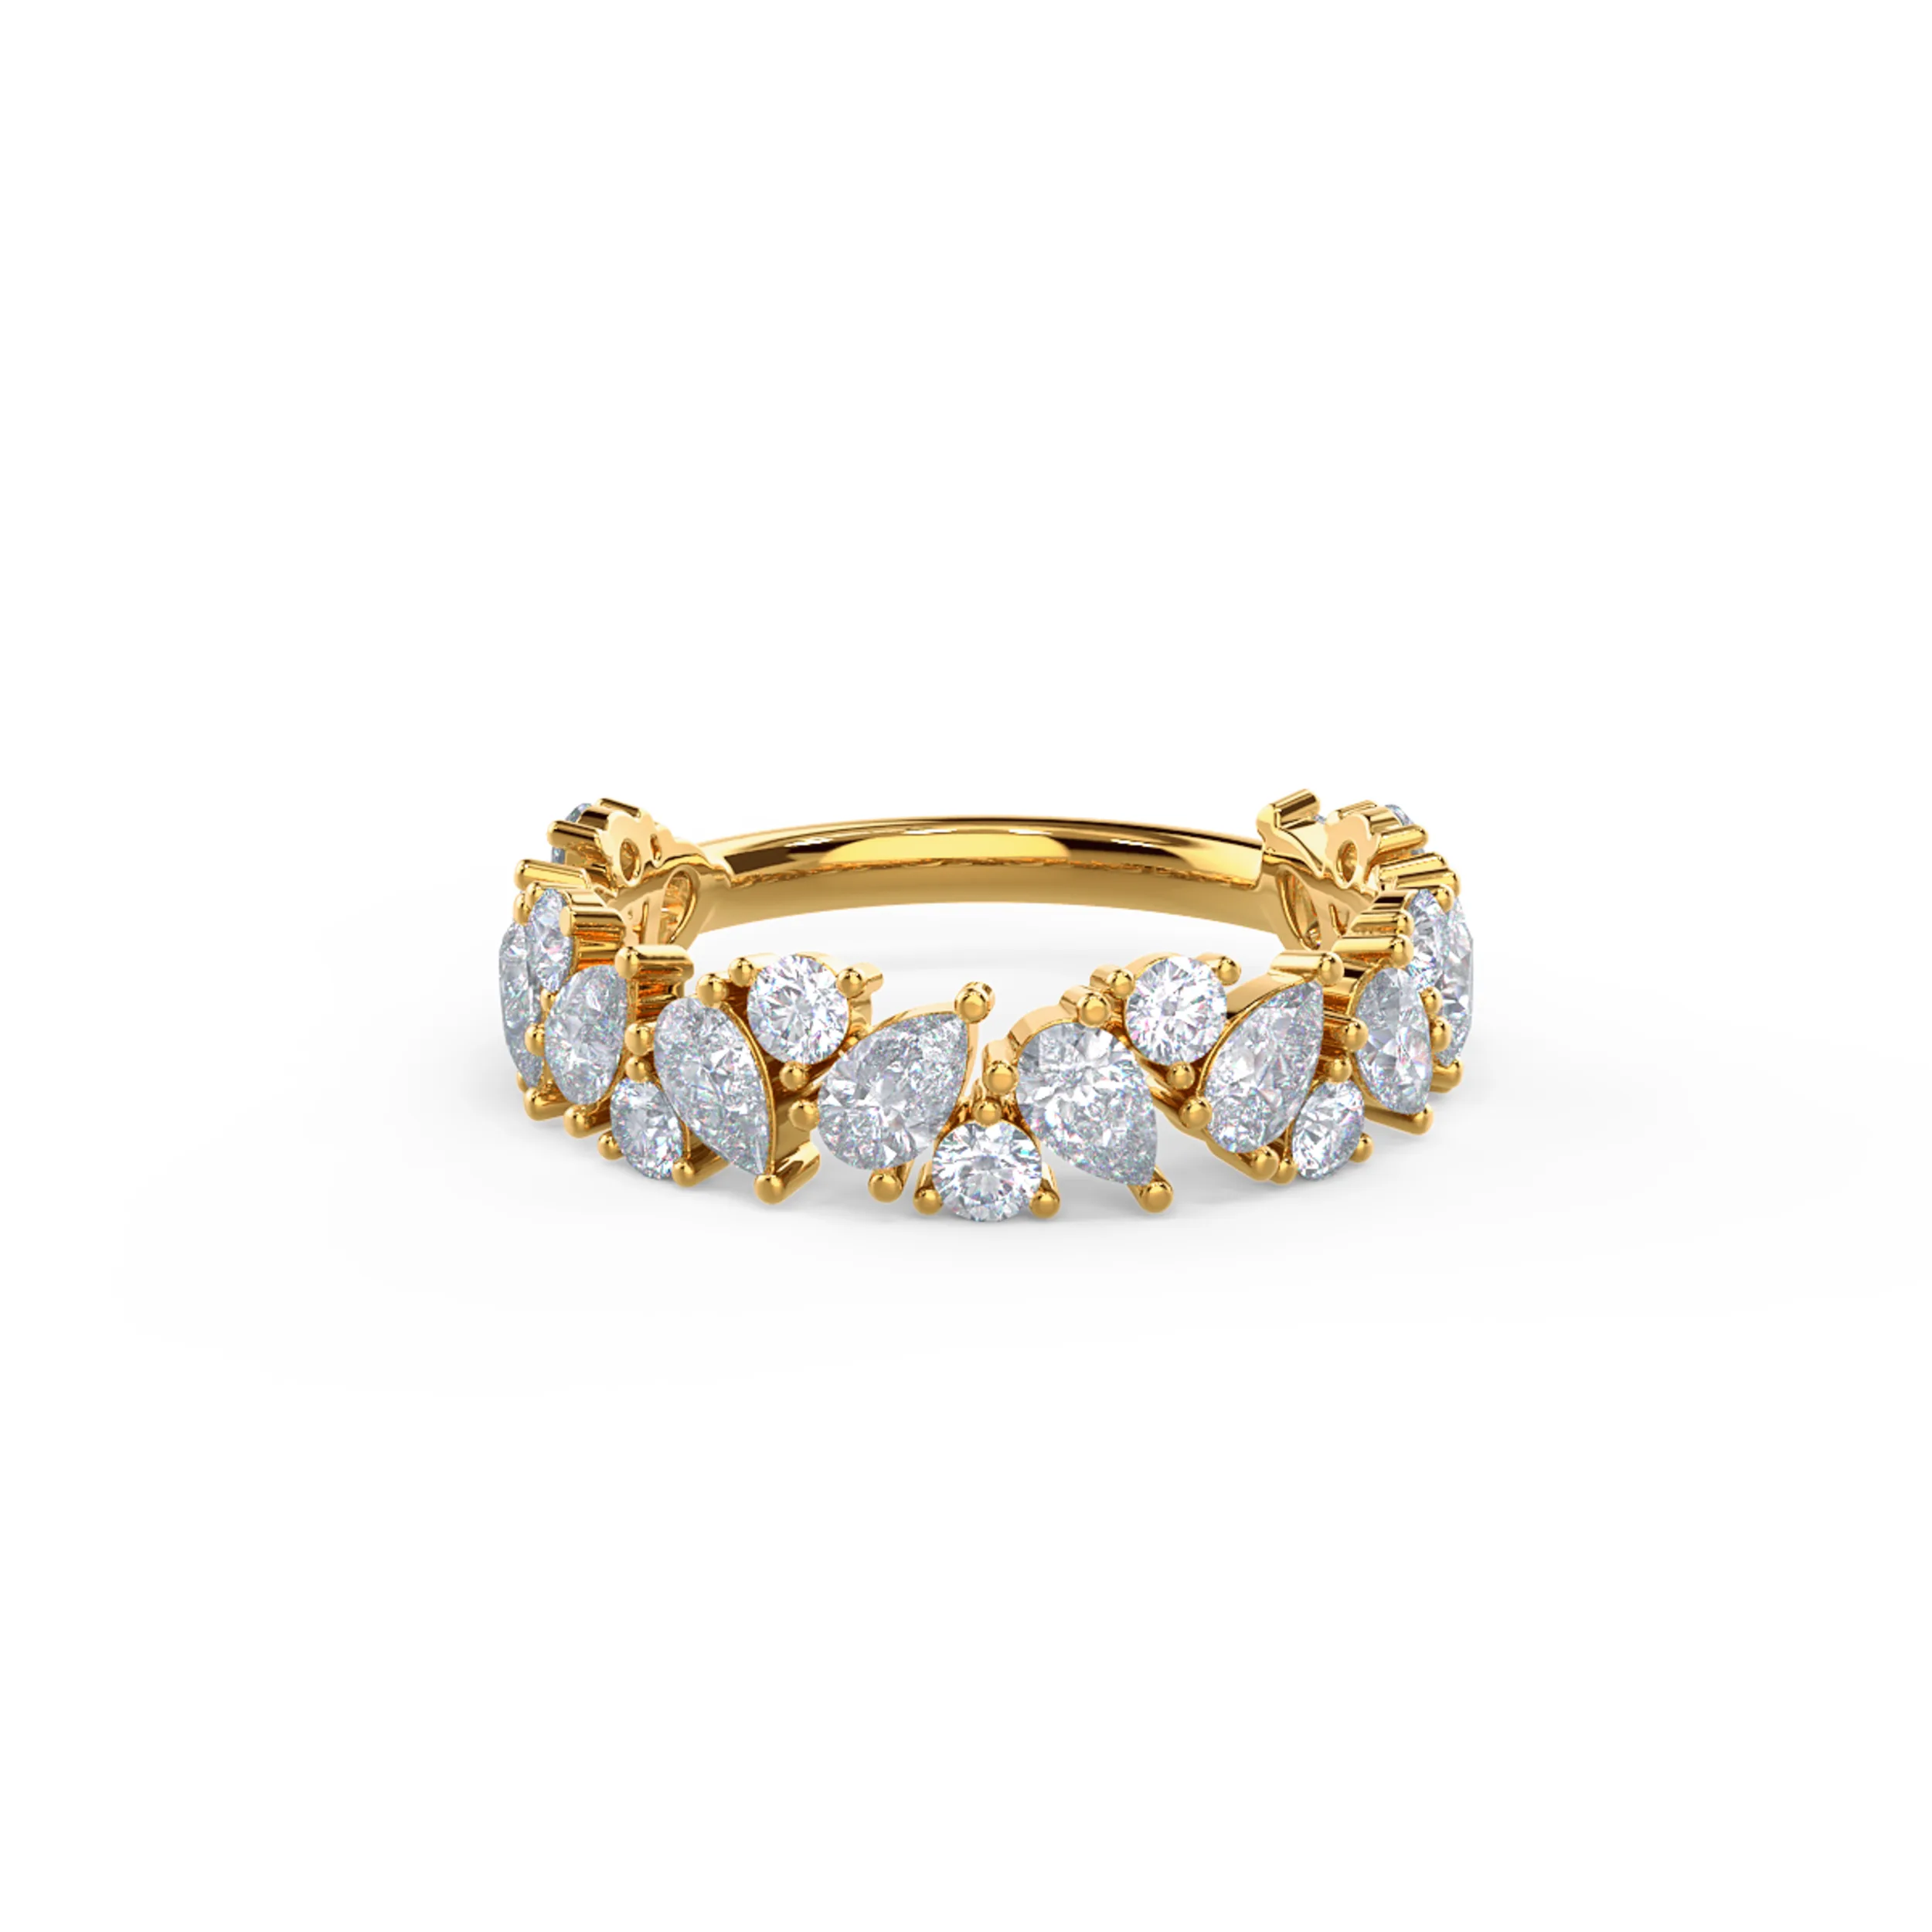 14ky Yellow Gold Theresa Three Quarter Band featuring Exceptional Quality 1.6 ct Diamonds (Main View)